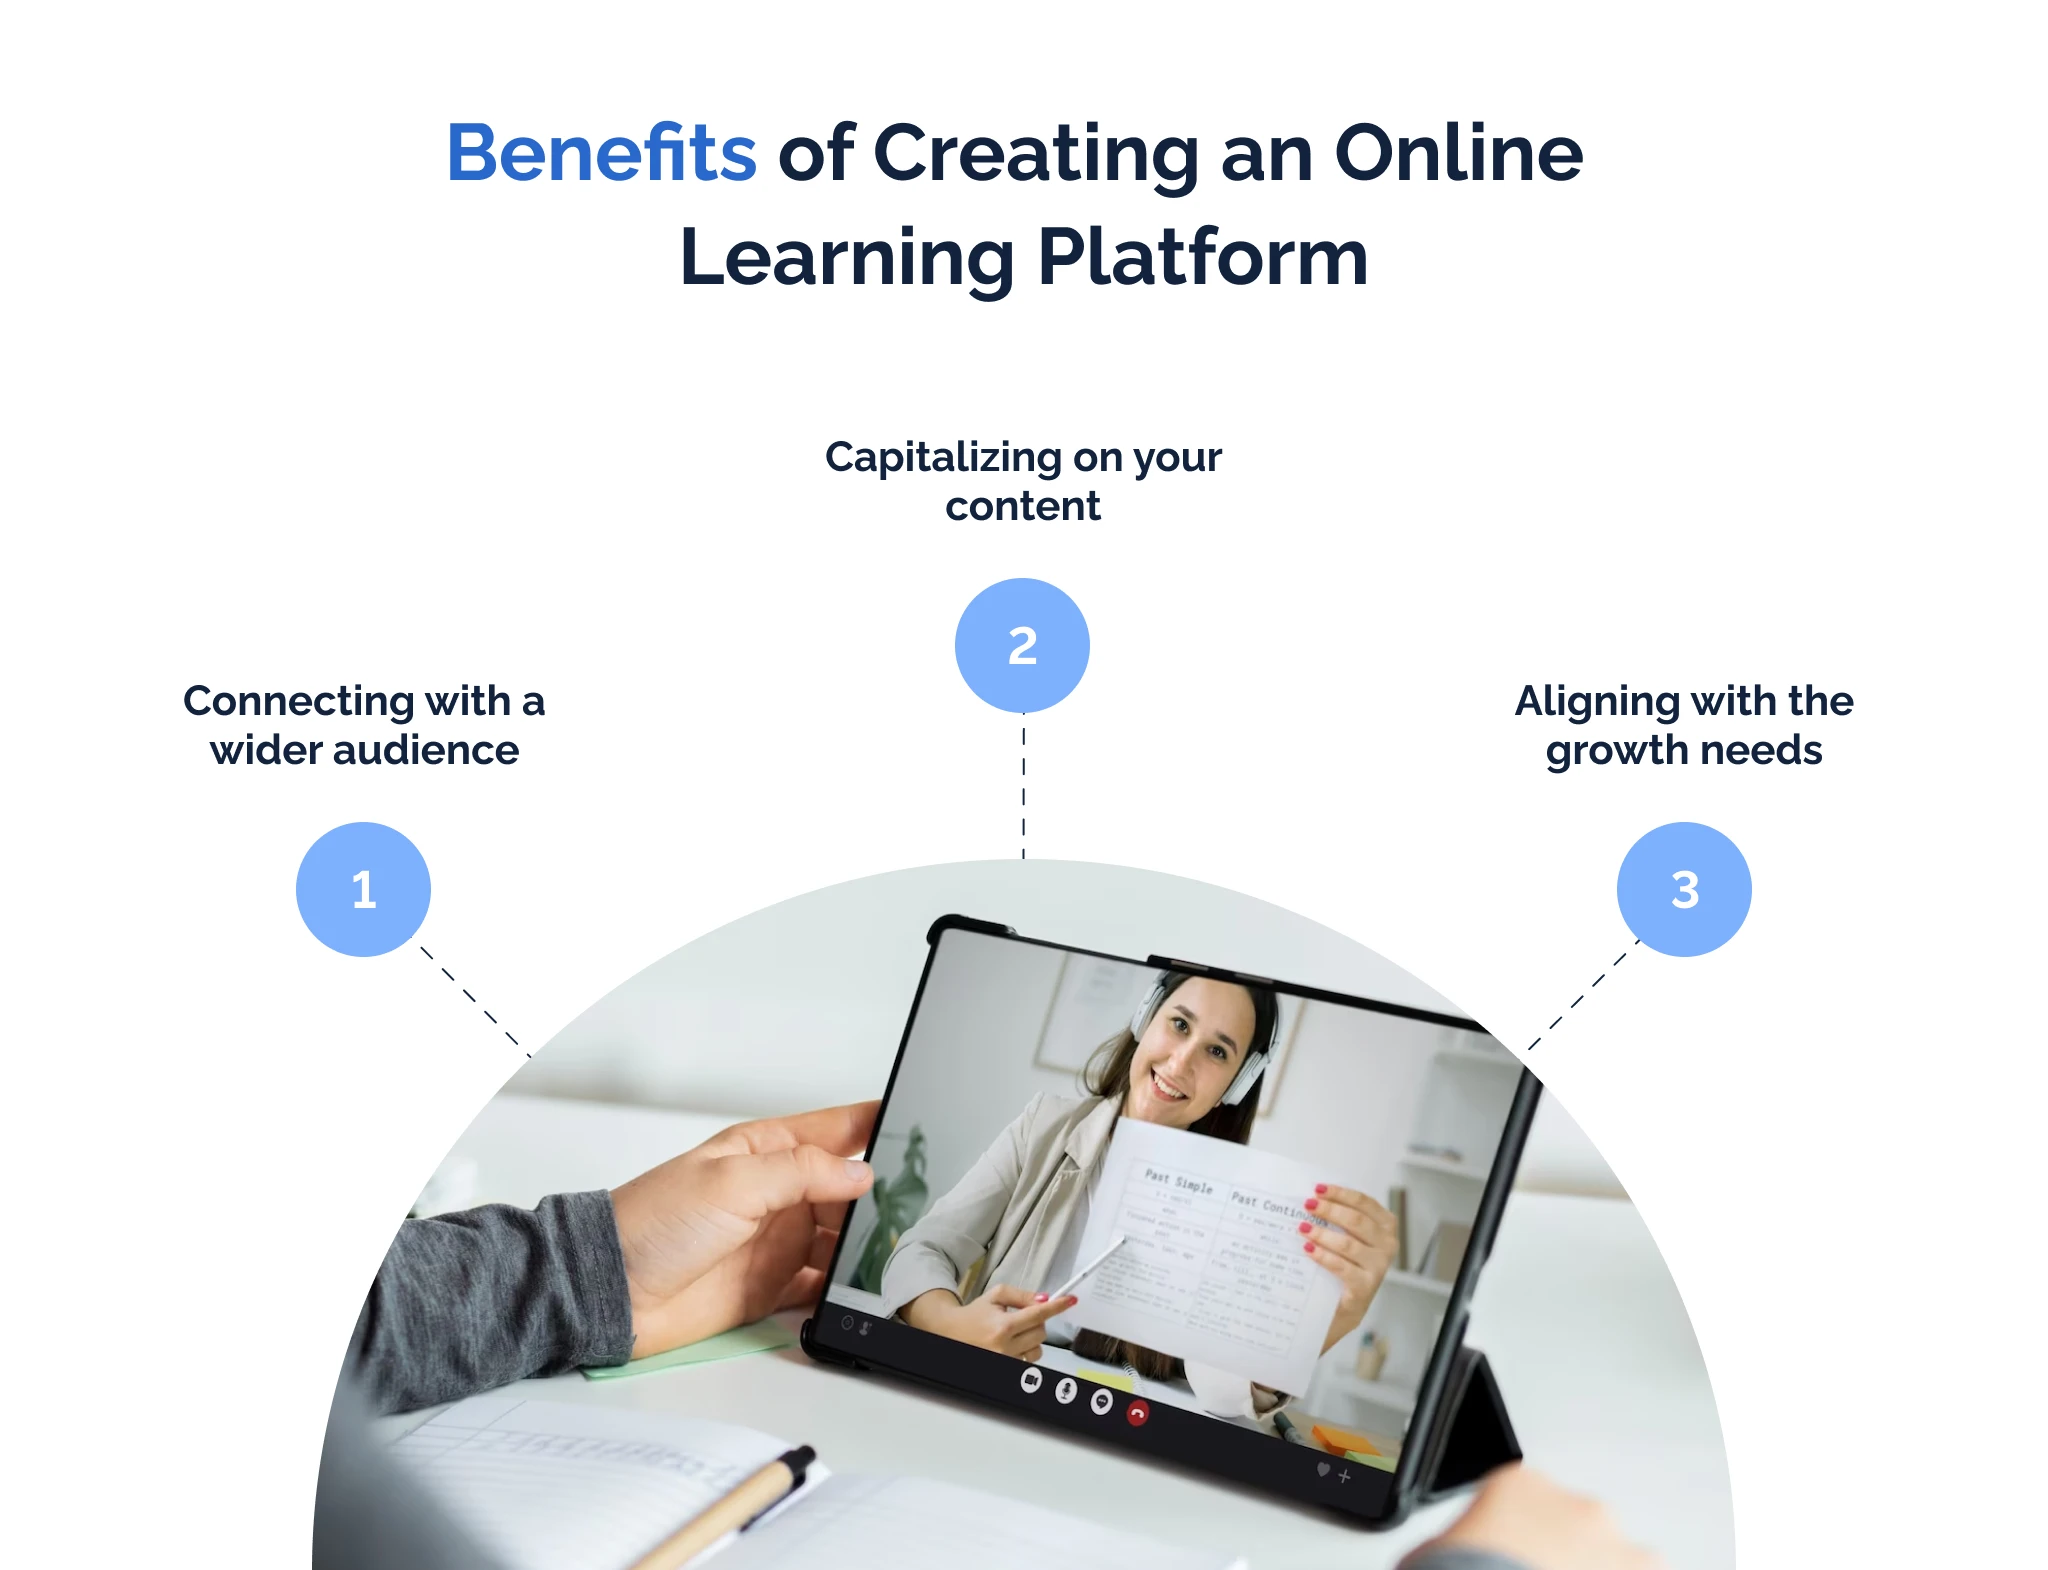 Benefits of creating an online learning platform